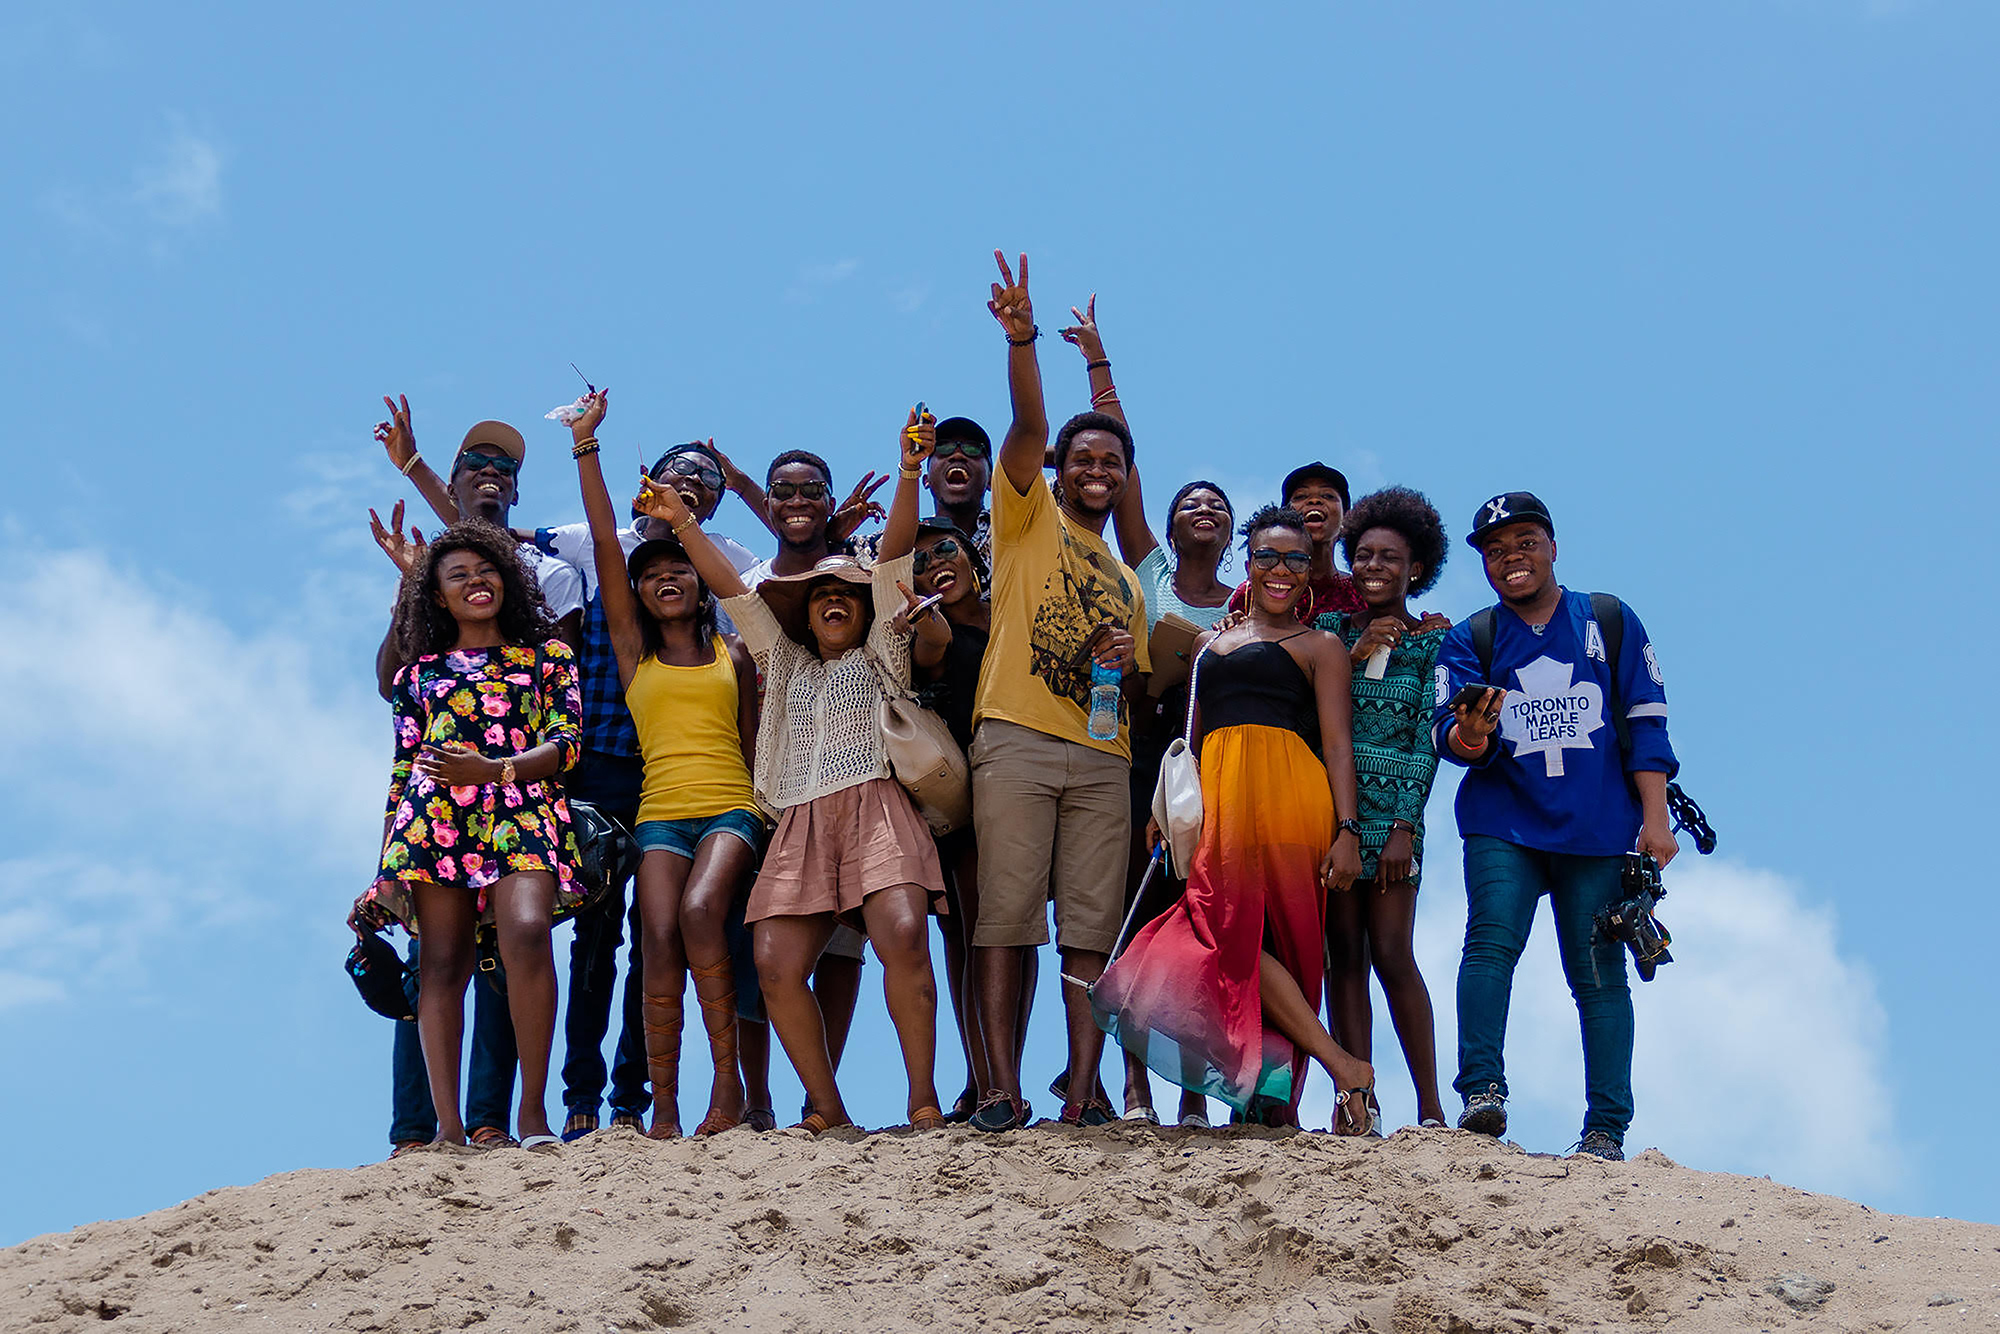 A large group of Black people, smiling and waving on a beach.